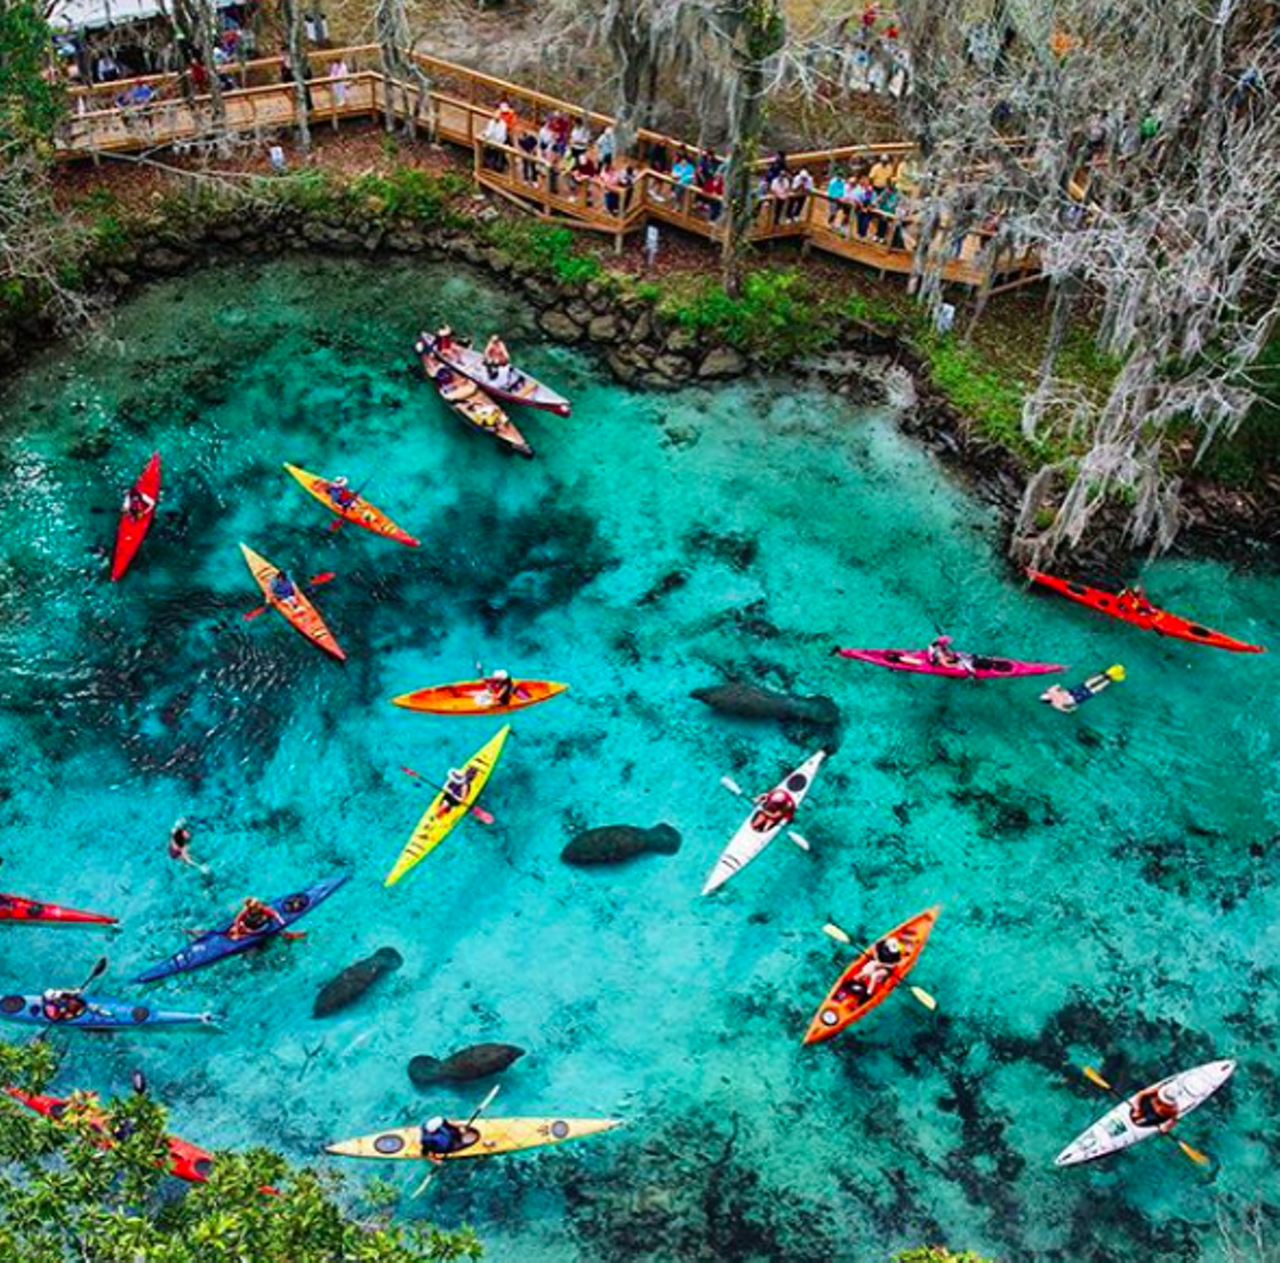 Where to See Manatees in Florida - Travel For Wildlife